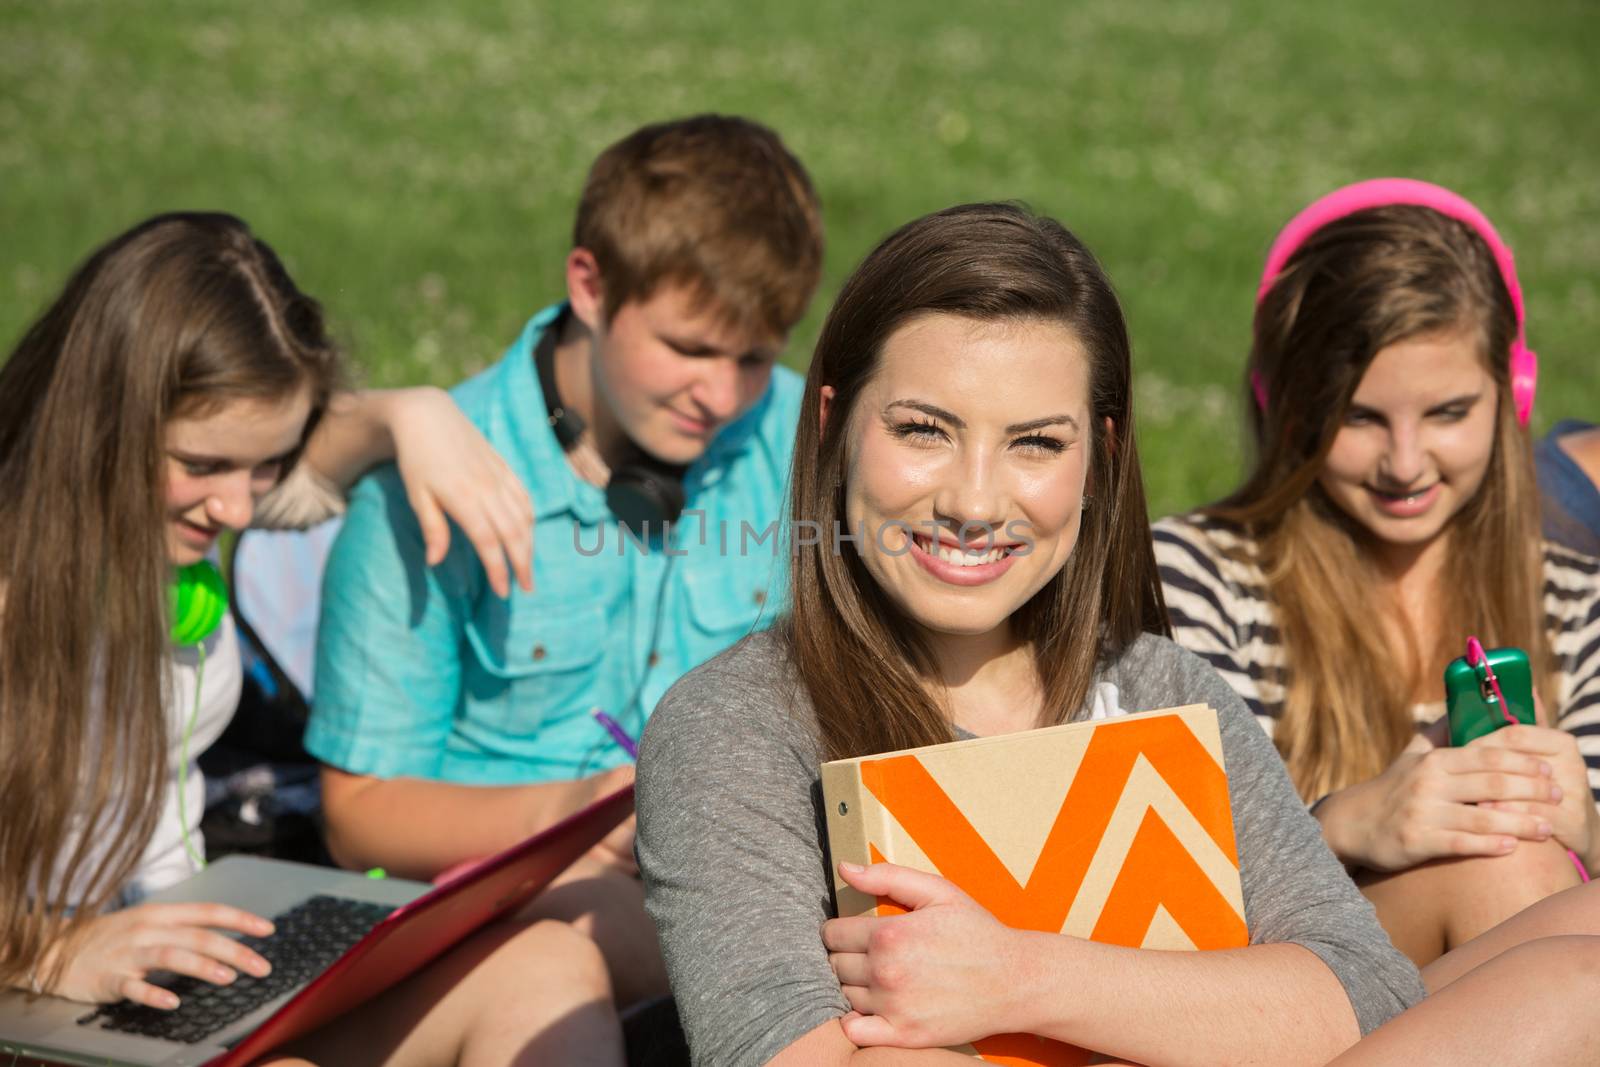 Cute teen girl holding binder with friends